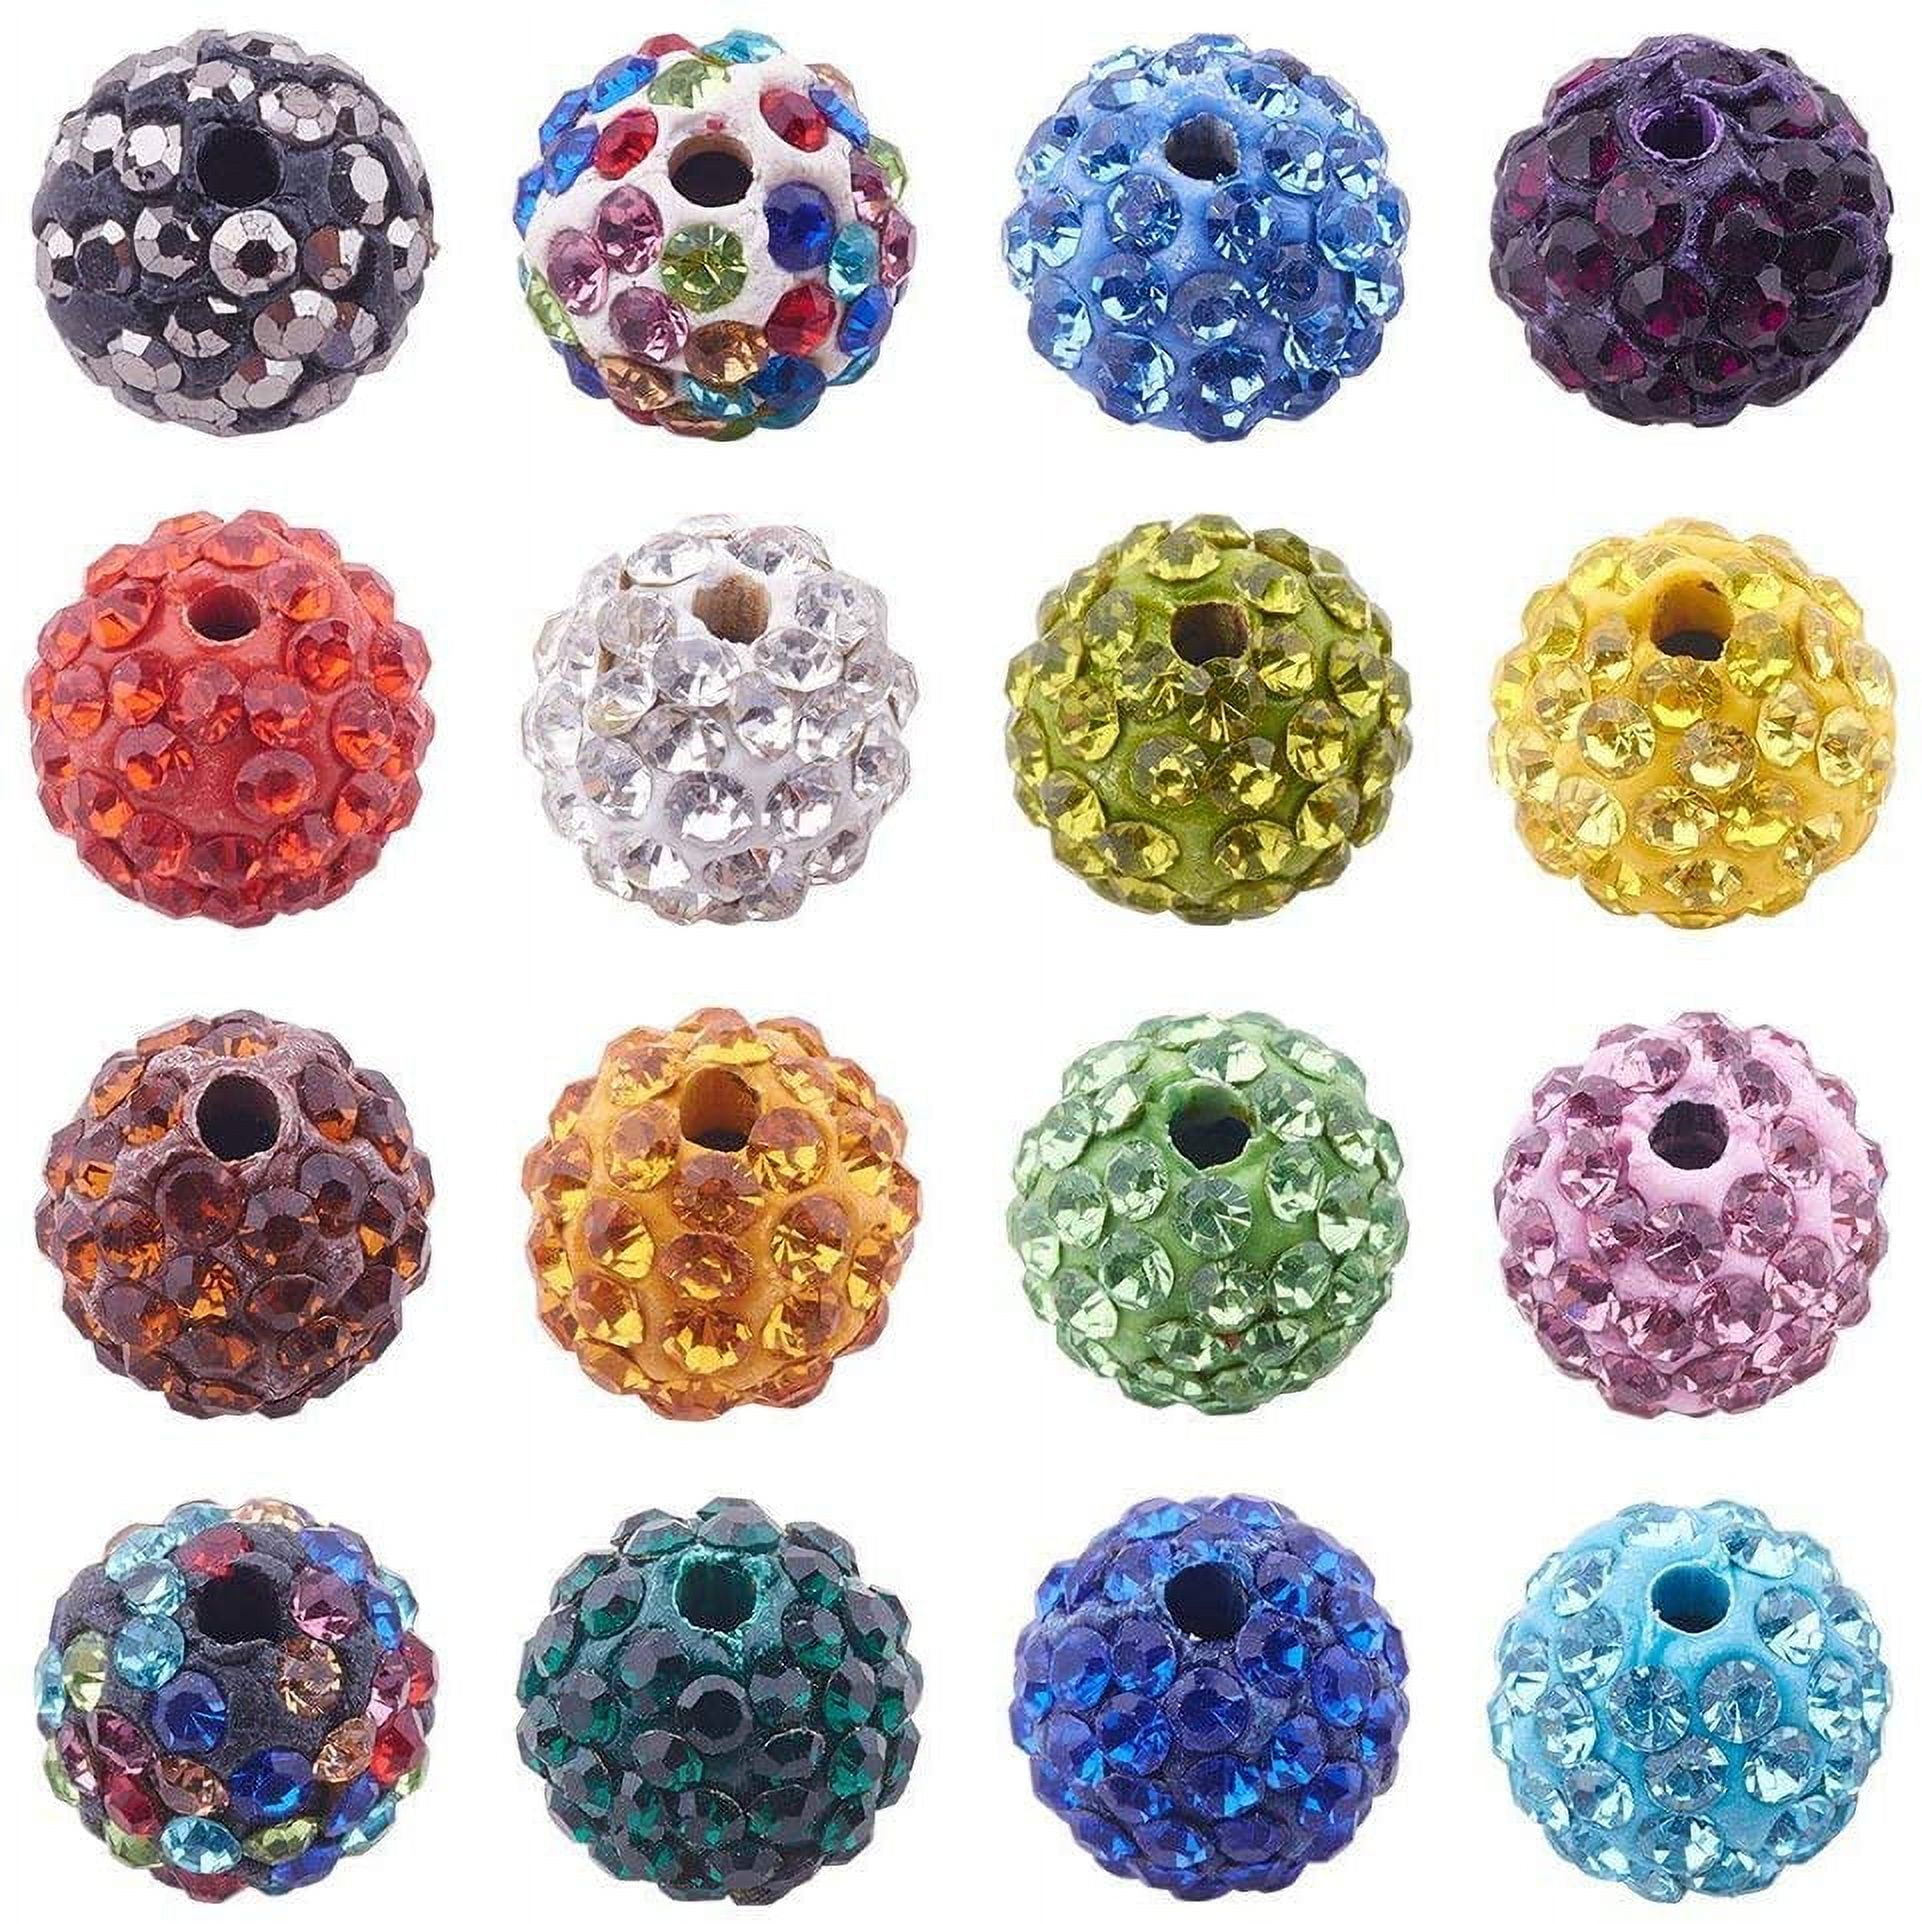  100pcs 20mm Colorful Resin Chunky Bubblegum Beads, Clay Beads  Pave Disco Ball Beads Mixed Color Polymer Clay Diamond Round Beads for DIY  Jewelry Making Necklace Christmas : Arts, Crafts & Sewing